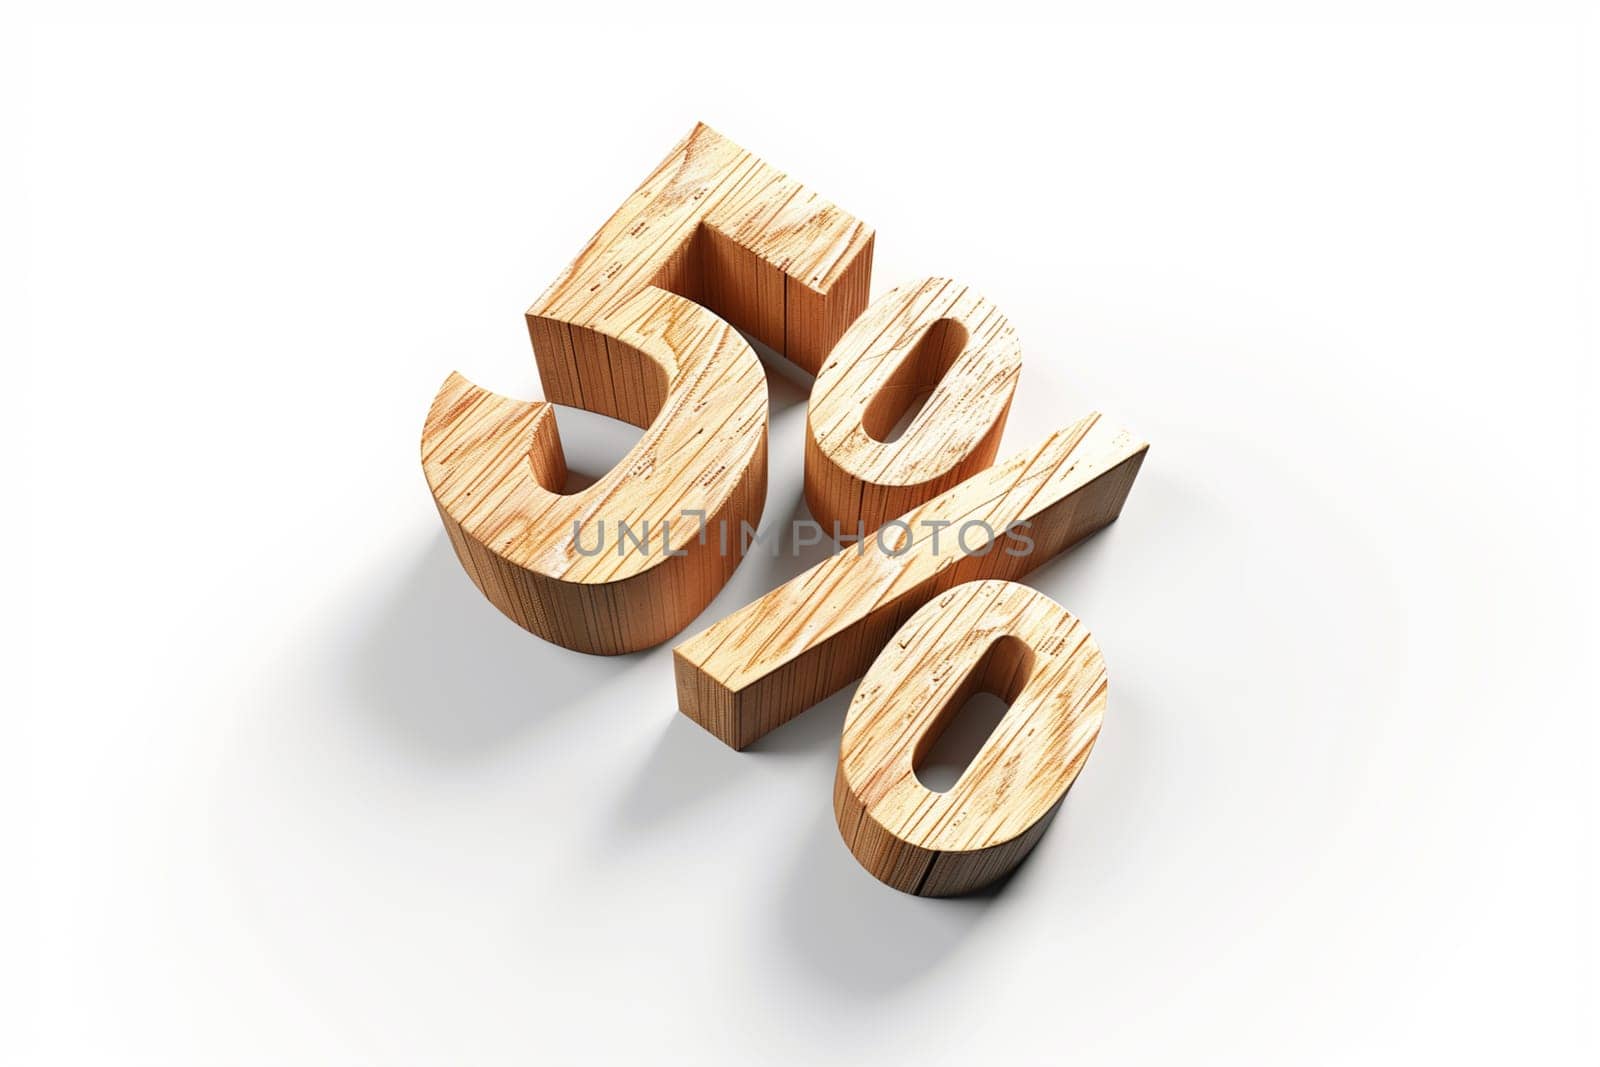 A wooden textured 5 percent figure in a prominent place, casting a soft shadow, symbolizes discounts and deposits.